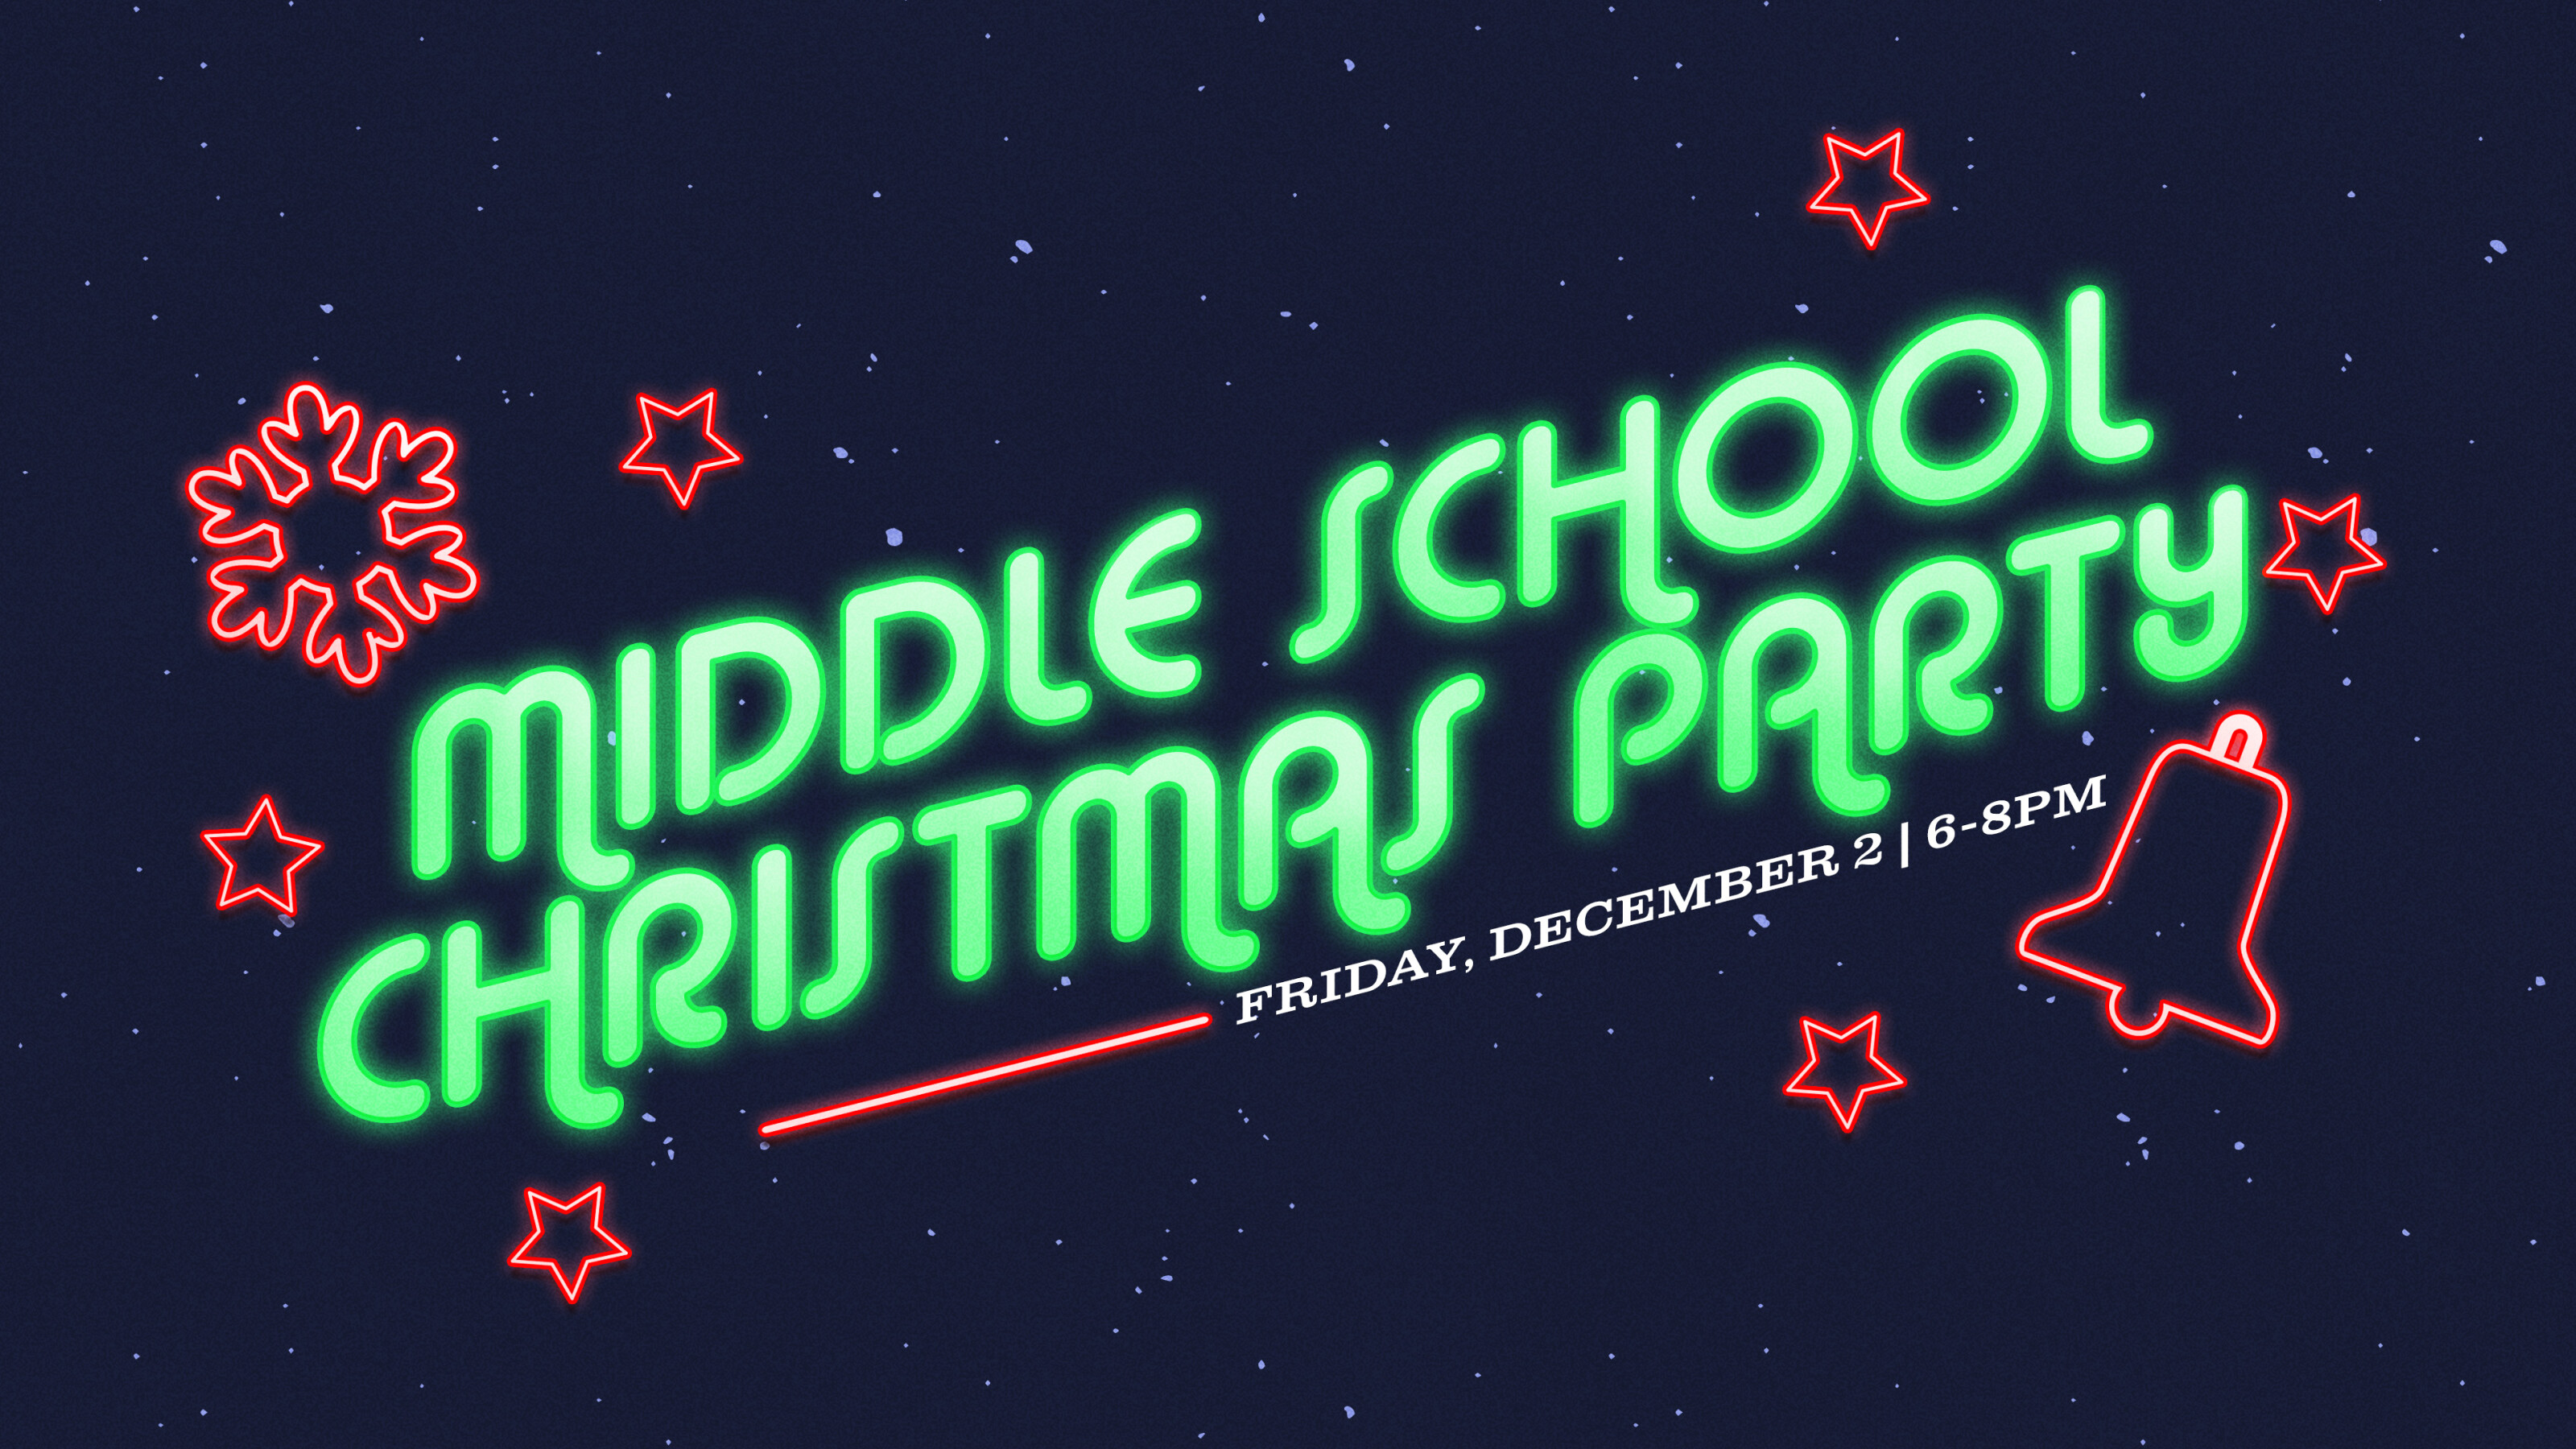 Middle School Christmas Party